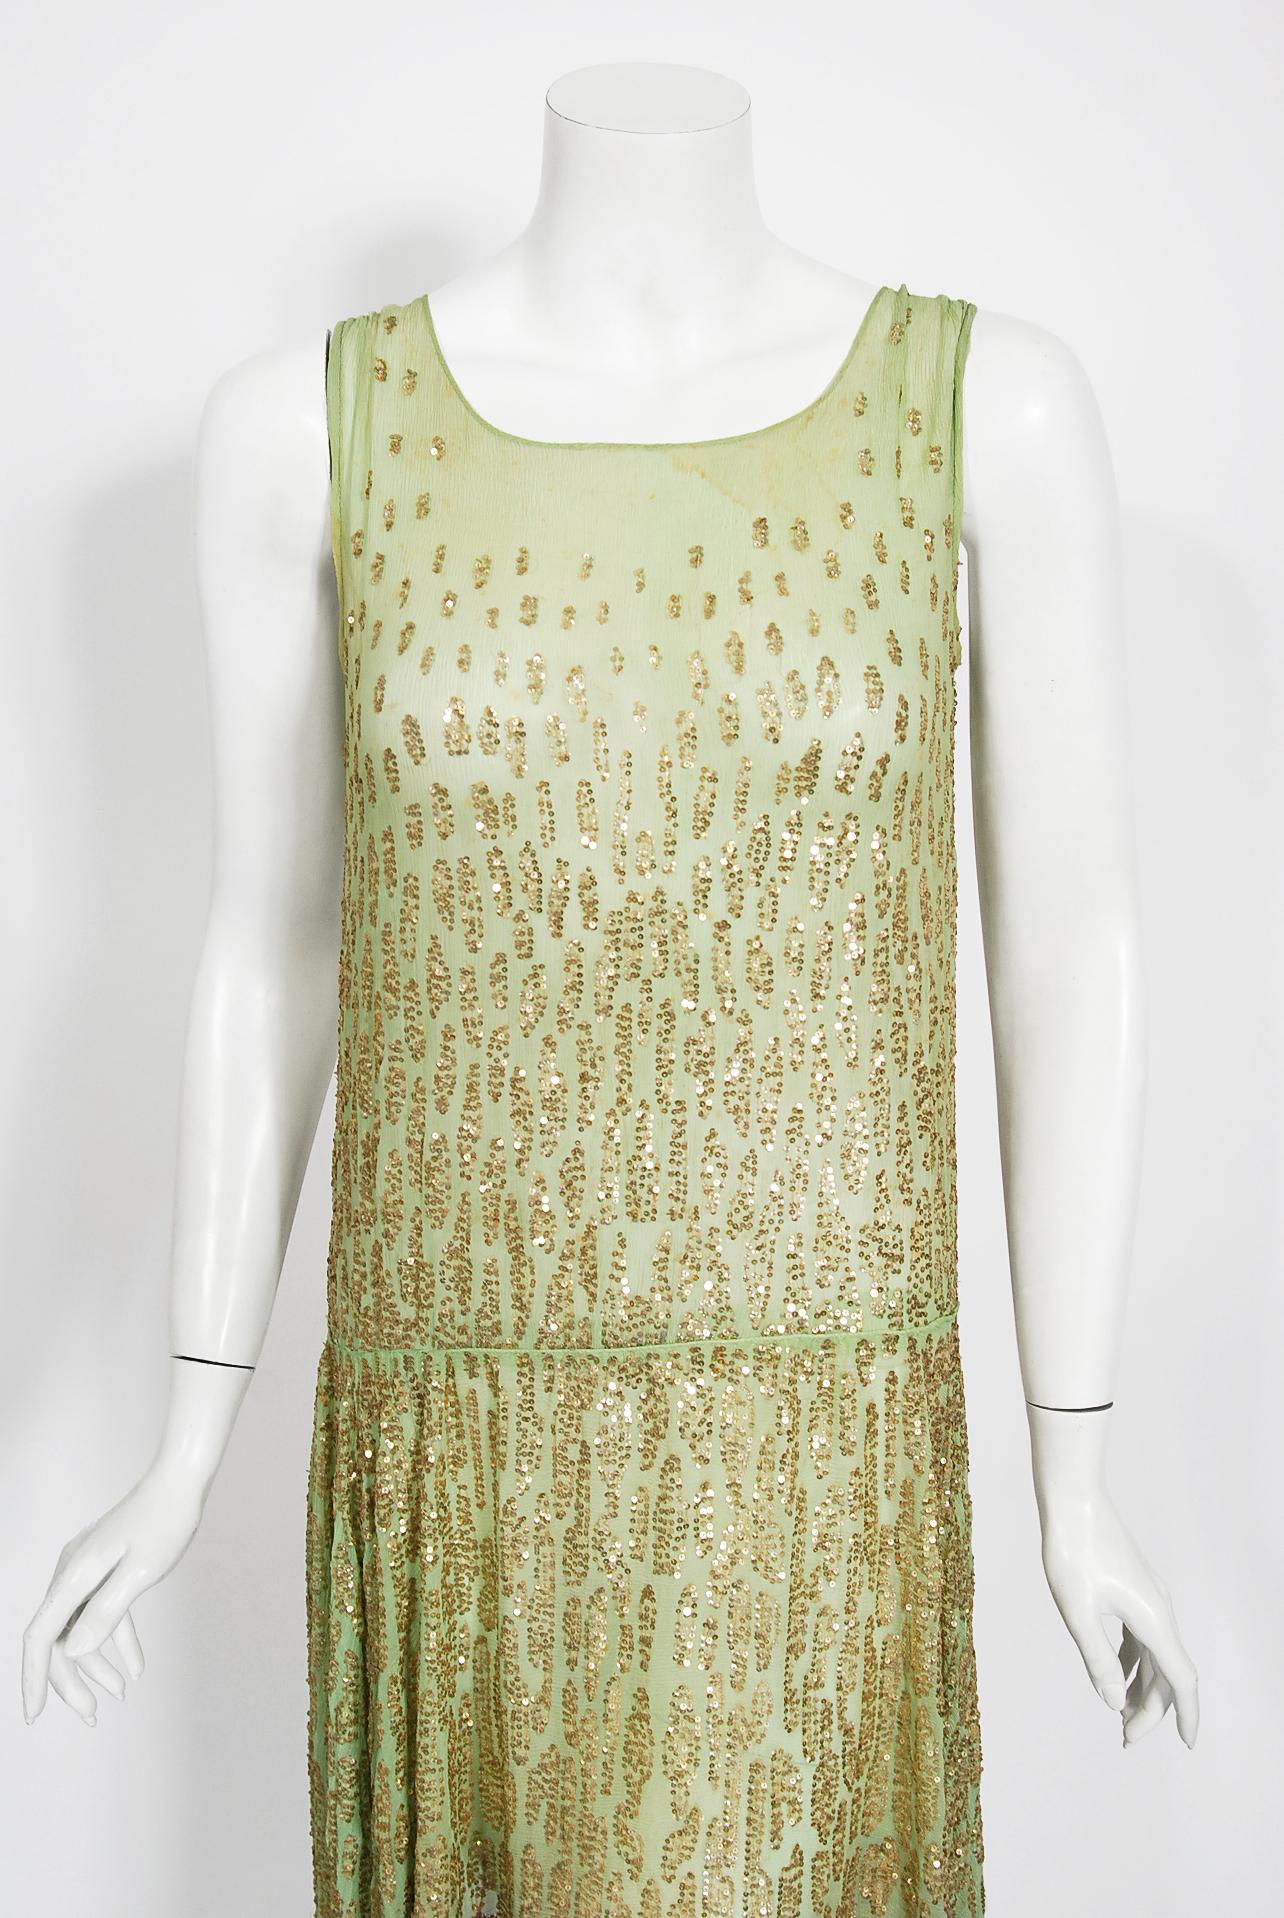 A truly breathtaking French couture sparkling mint-green beaded flapper dance dress dating back to the mid 1920's. The magical mint-green color mixed with the unique gold deco clustered micro-sequins touches a deep chord in our collective aesthetic